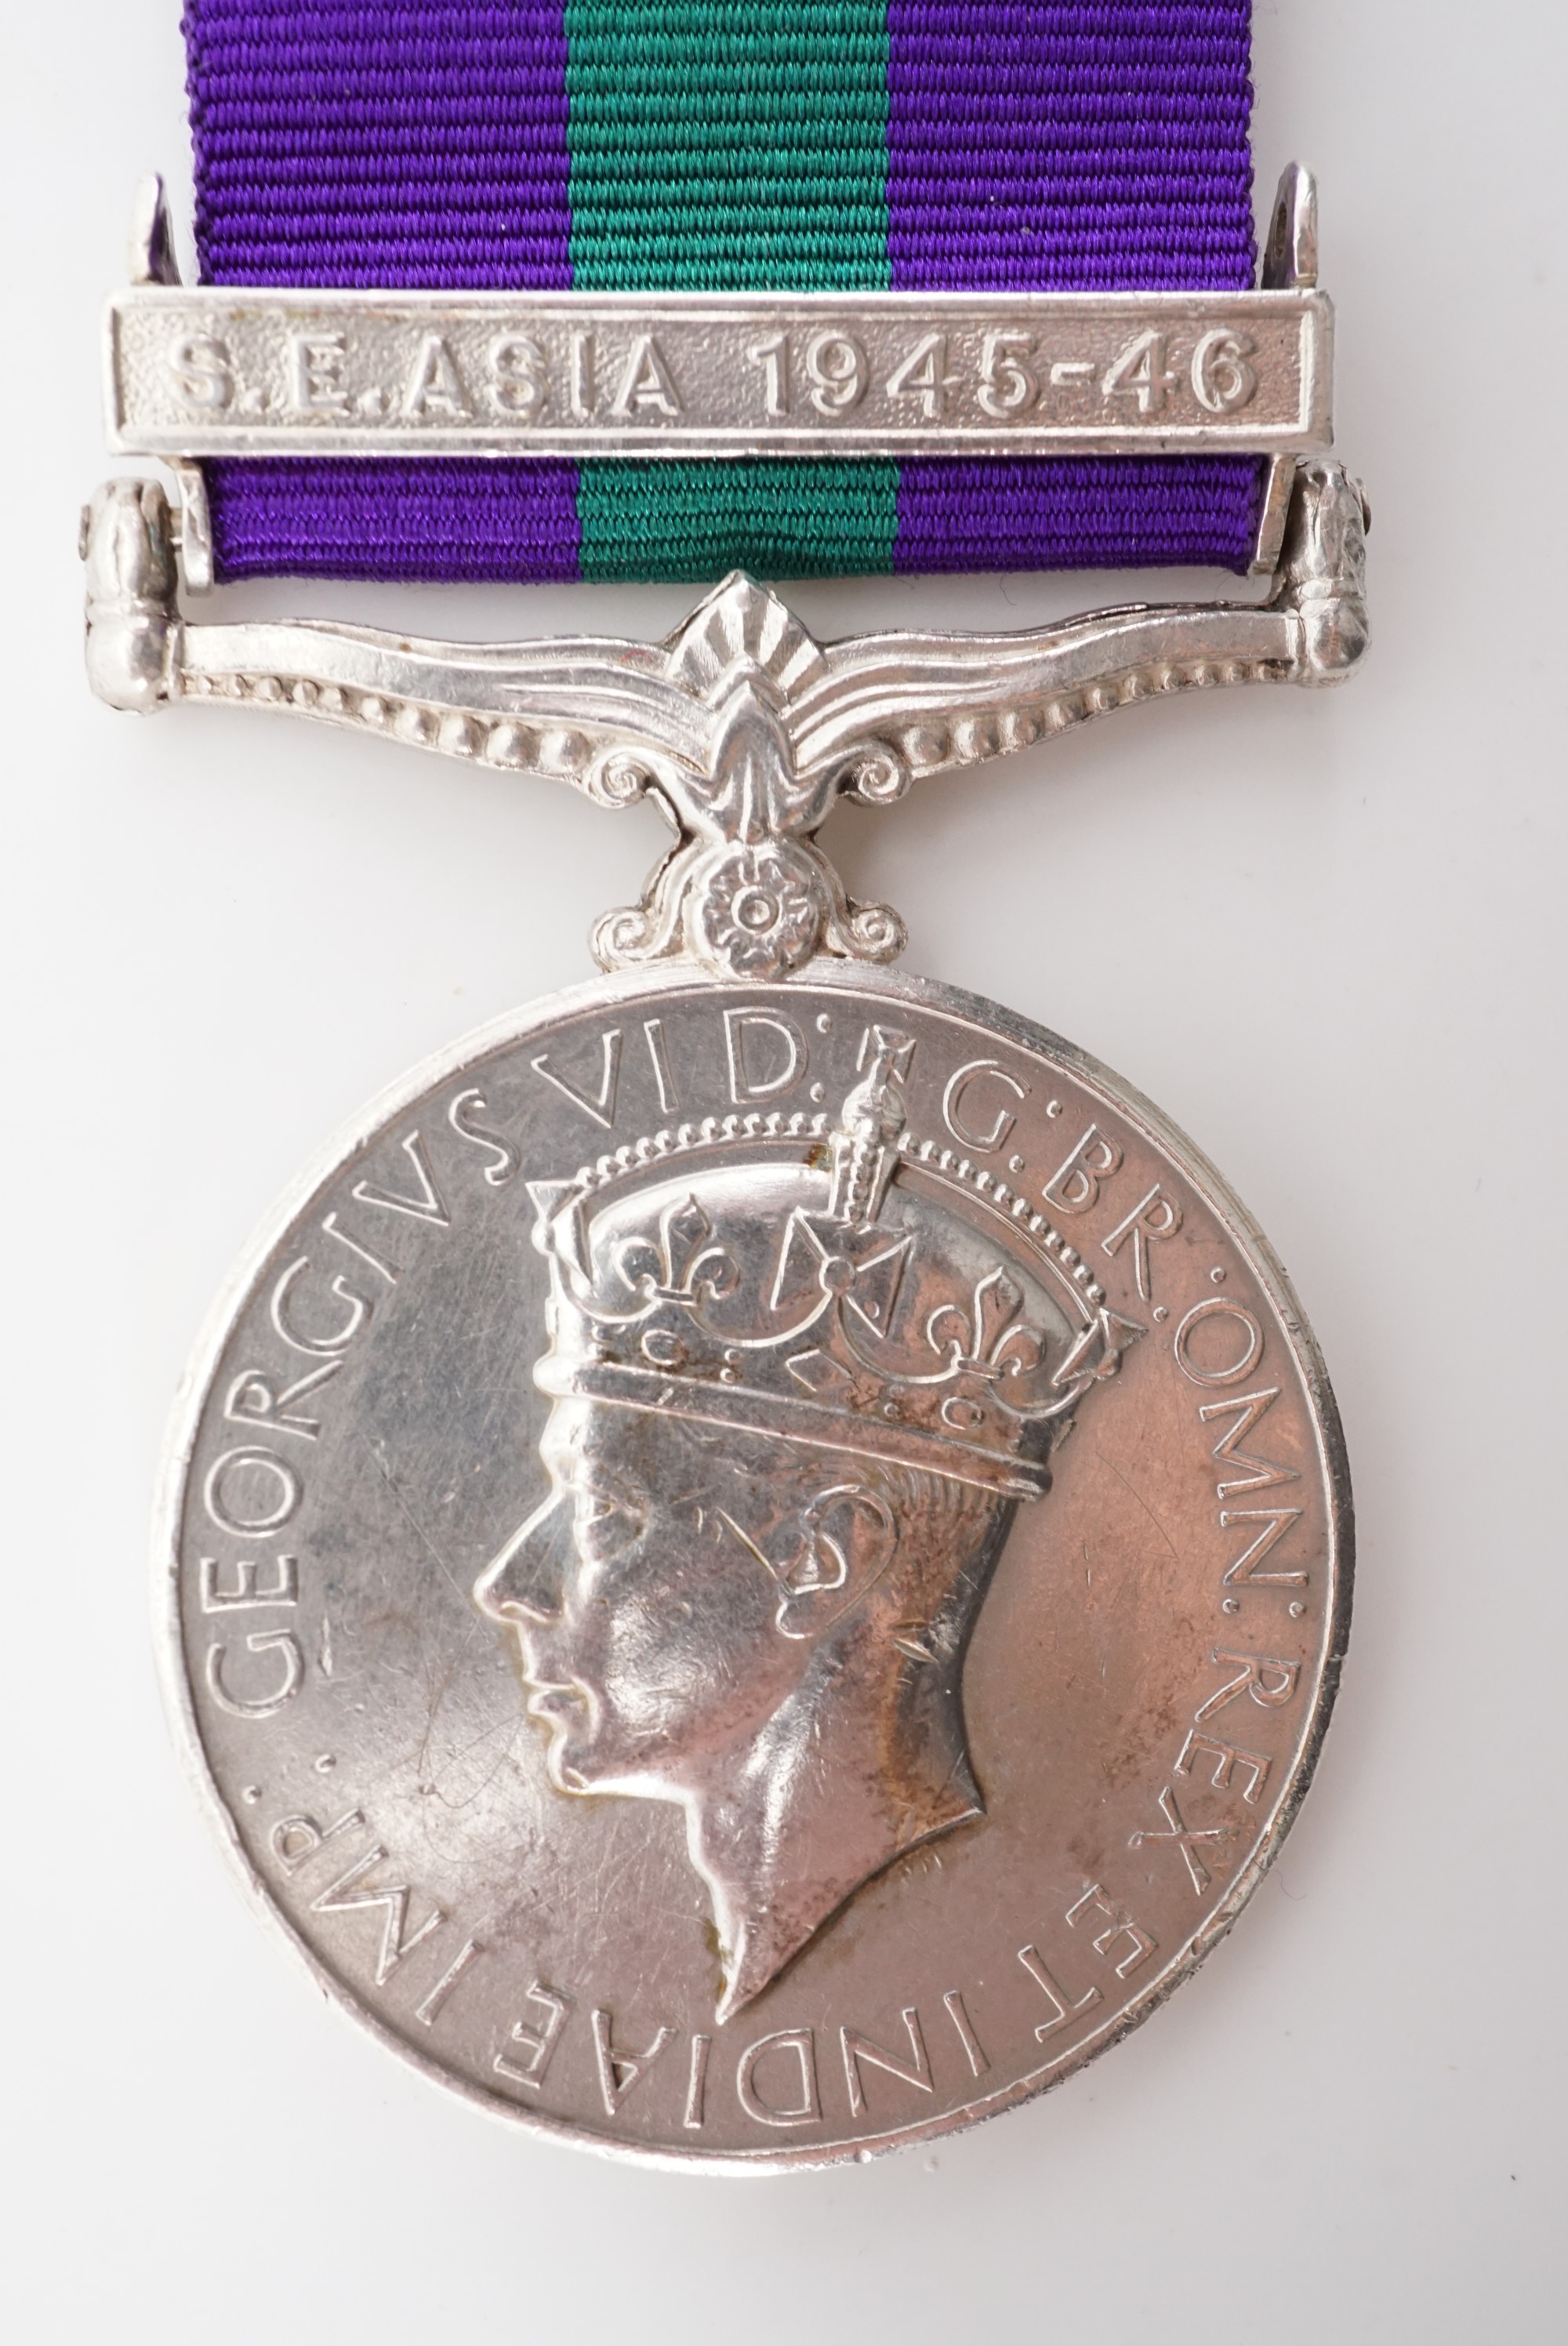 A George VI General Service Medal with S E Asia 1945-46 clasp, (erased)